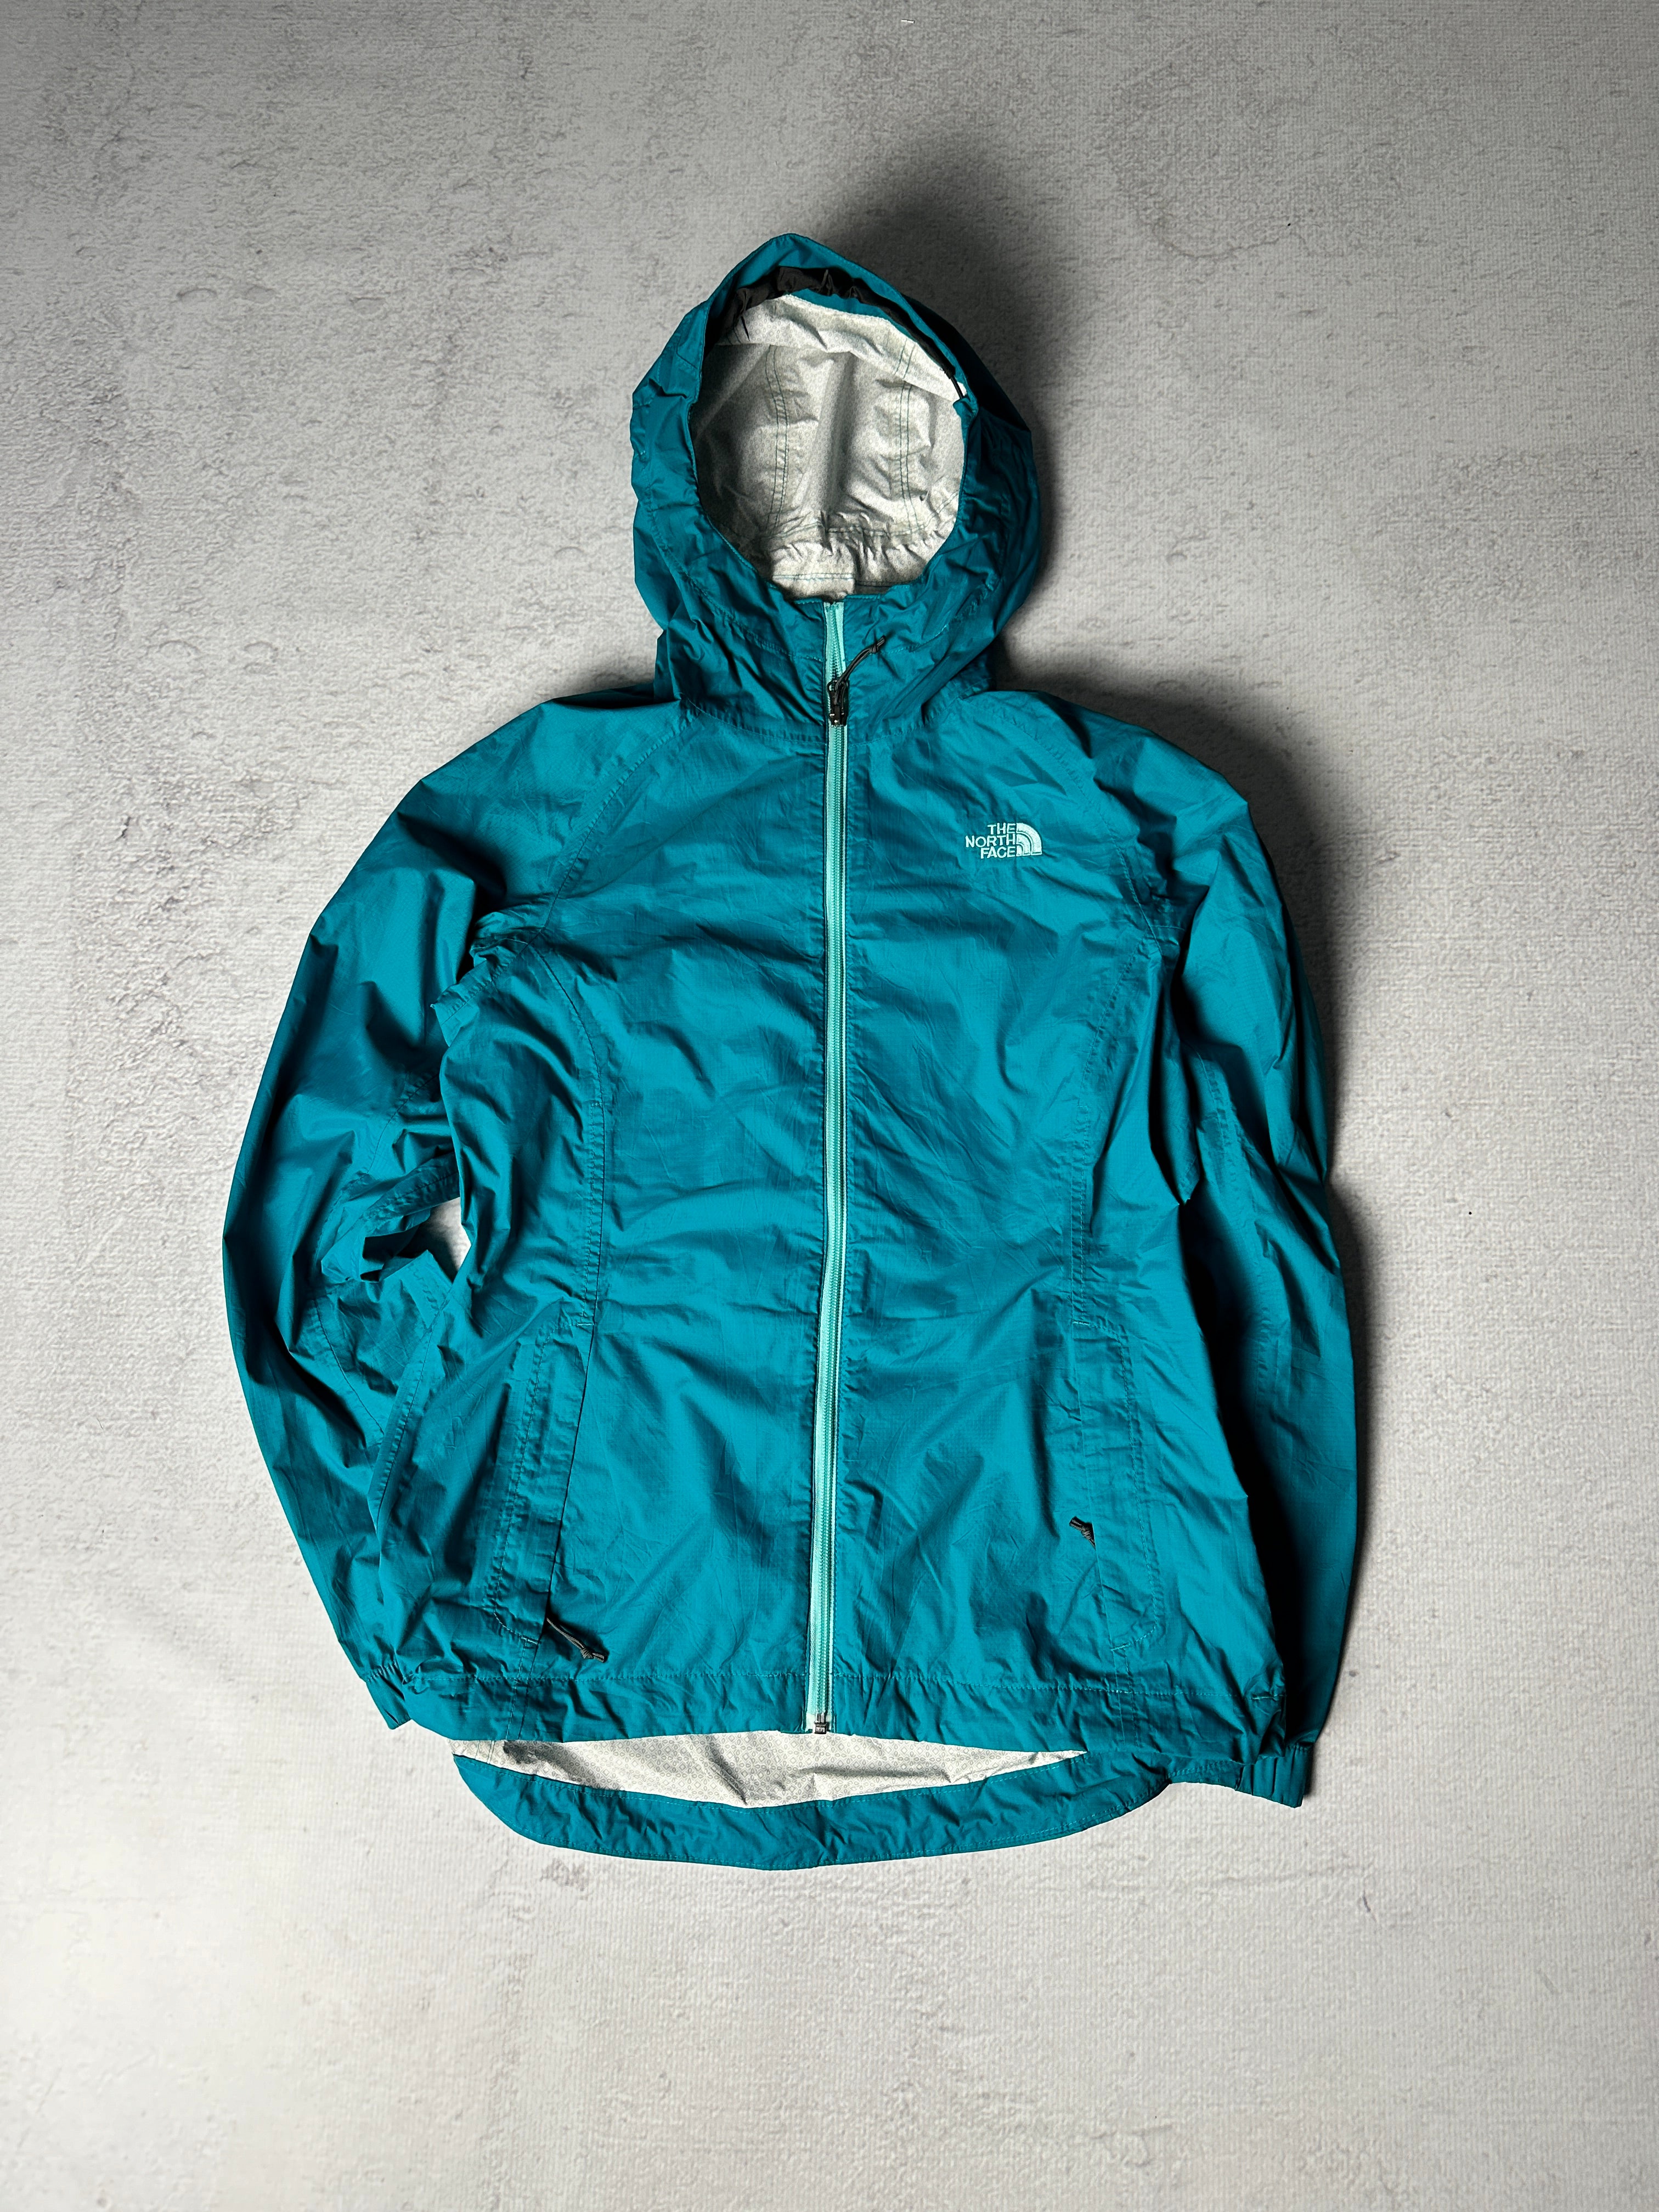 Vintage The North Face Windbreaker - Women's Small